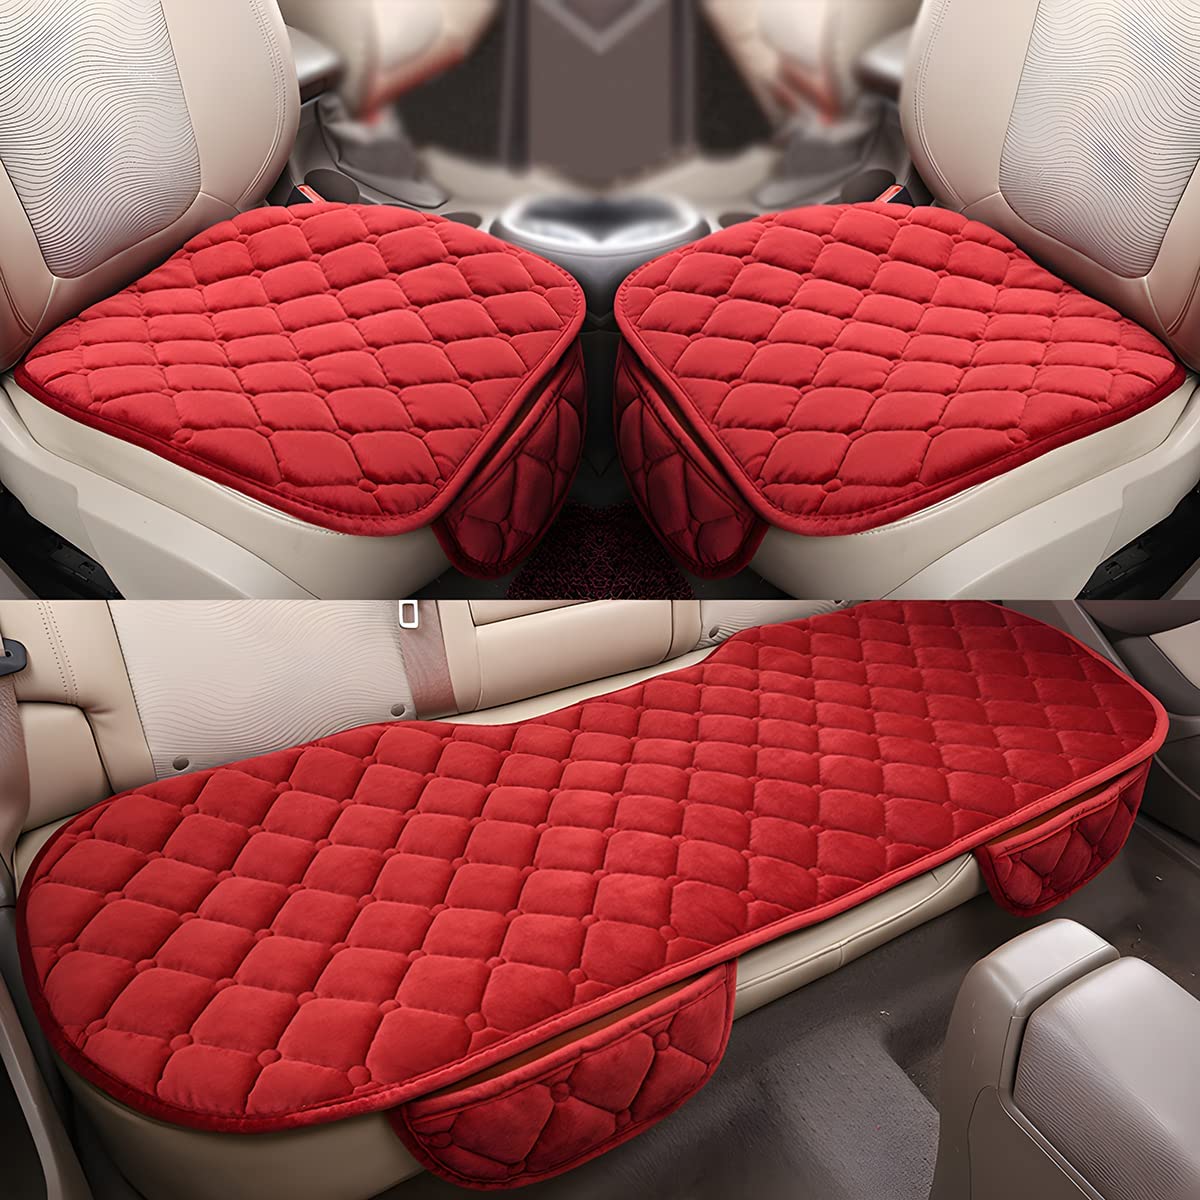 2Pack Car Seat Cushion,Non-Slip Rubber Bottom with Storage Pouch,Premium  Comfort Memory Foam,Driver Seat Back Seat Cushion,Car Seat Pad Universal  (Red) 